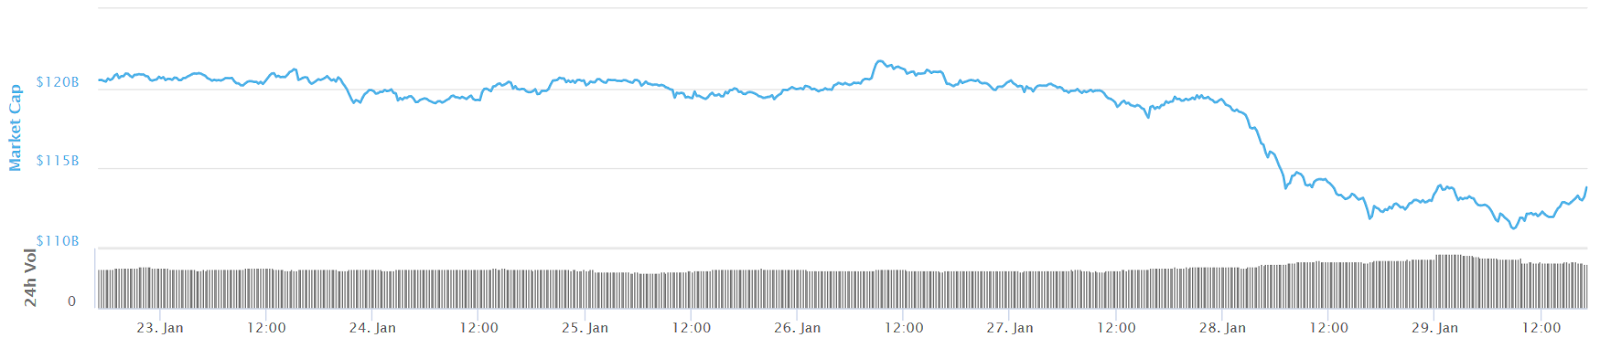 Total crypto market cap 7-day chart